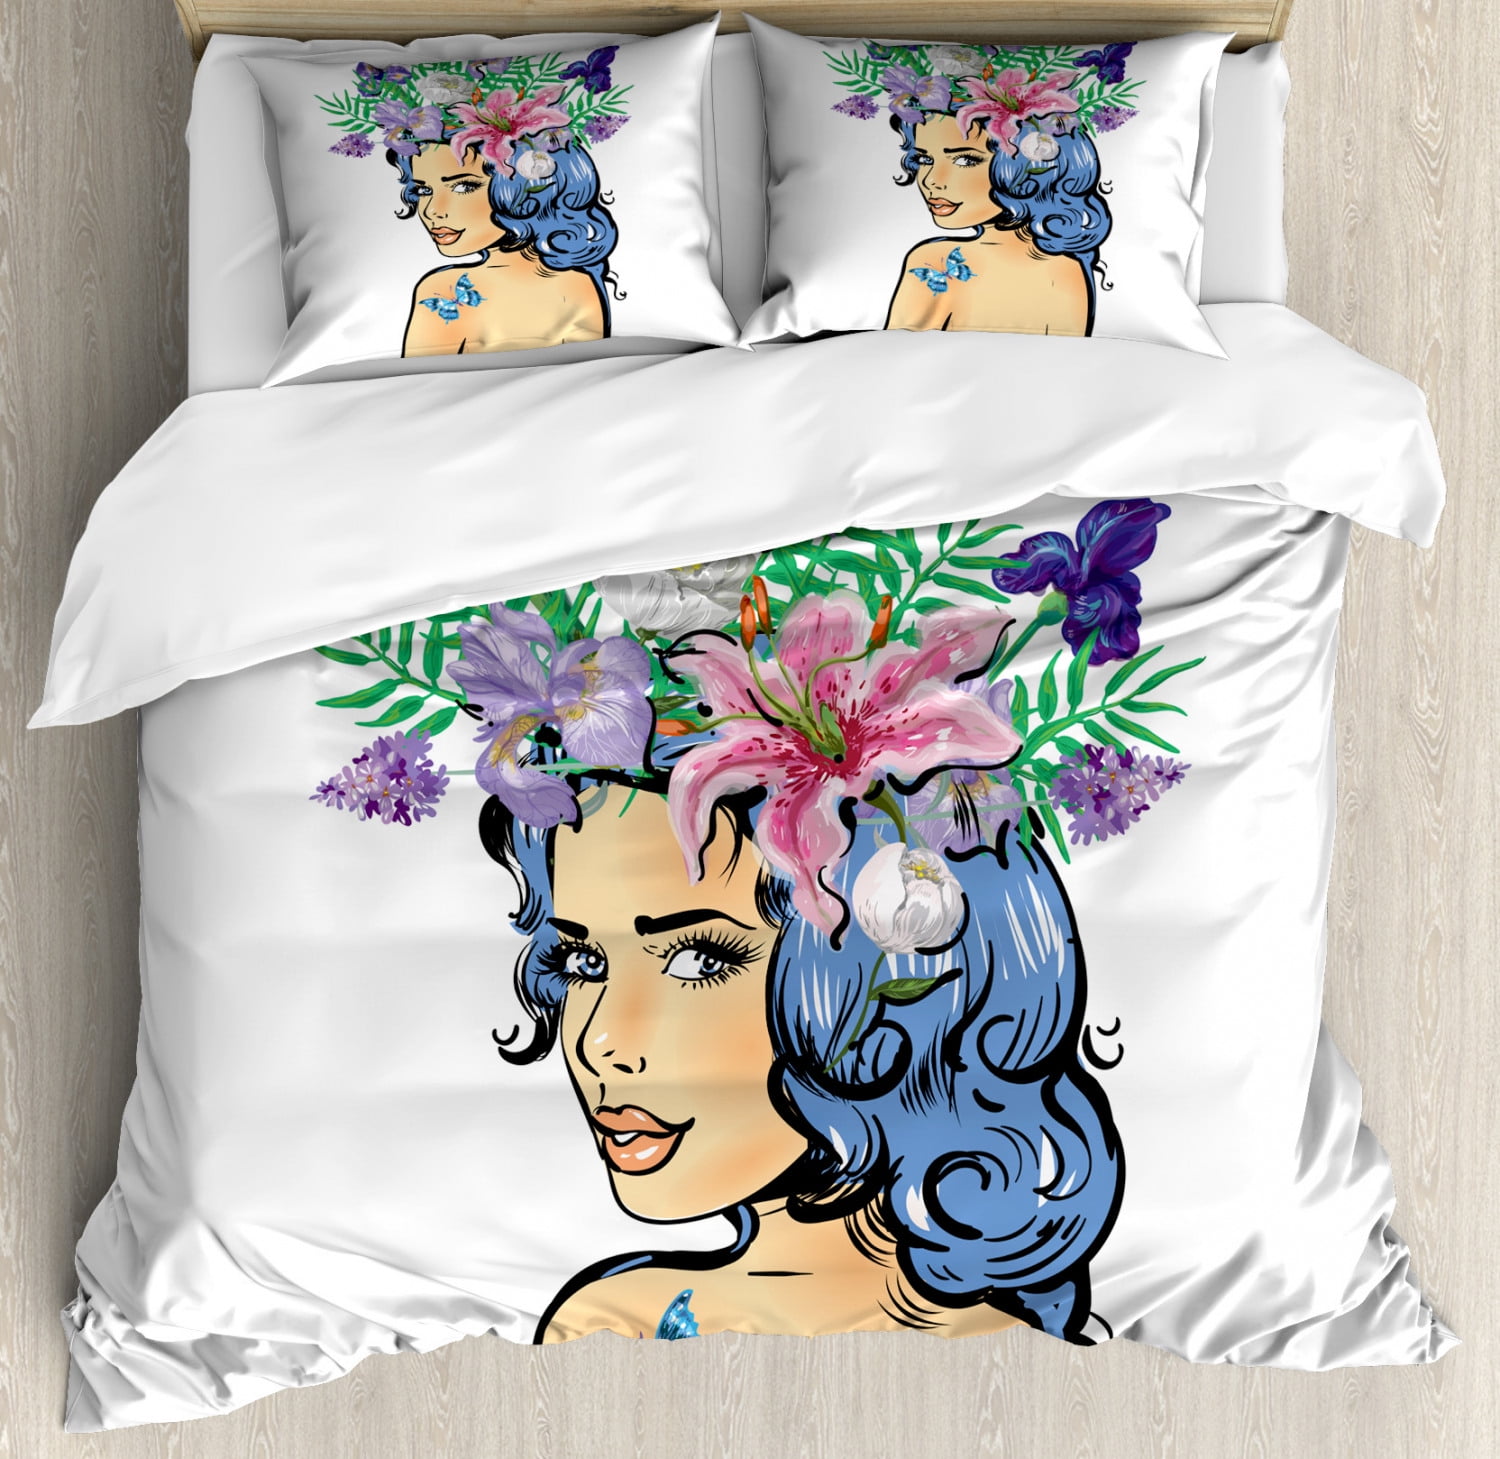 Flower Duvet Cover Set King Size Floral Head Woman With Hibiscus